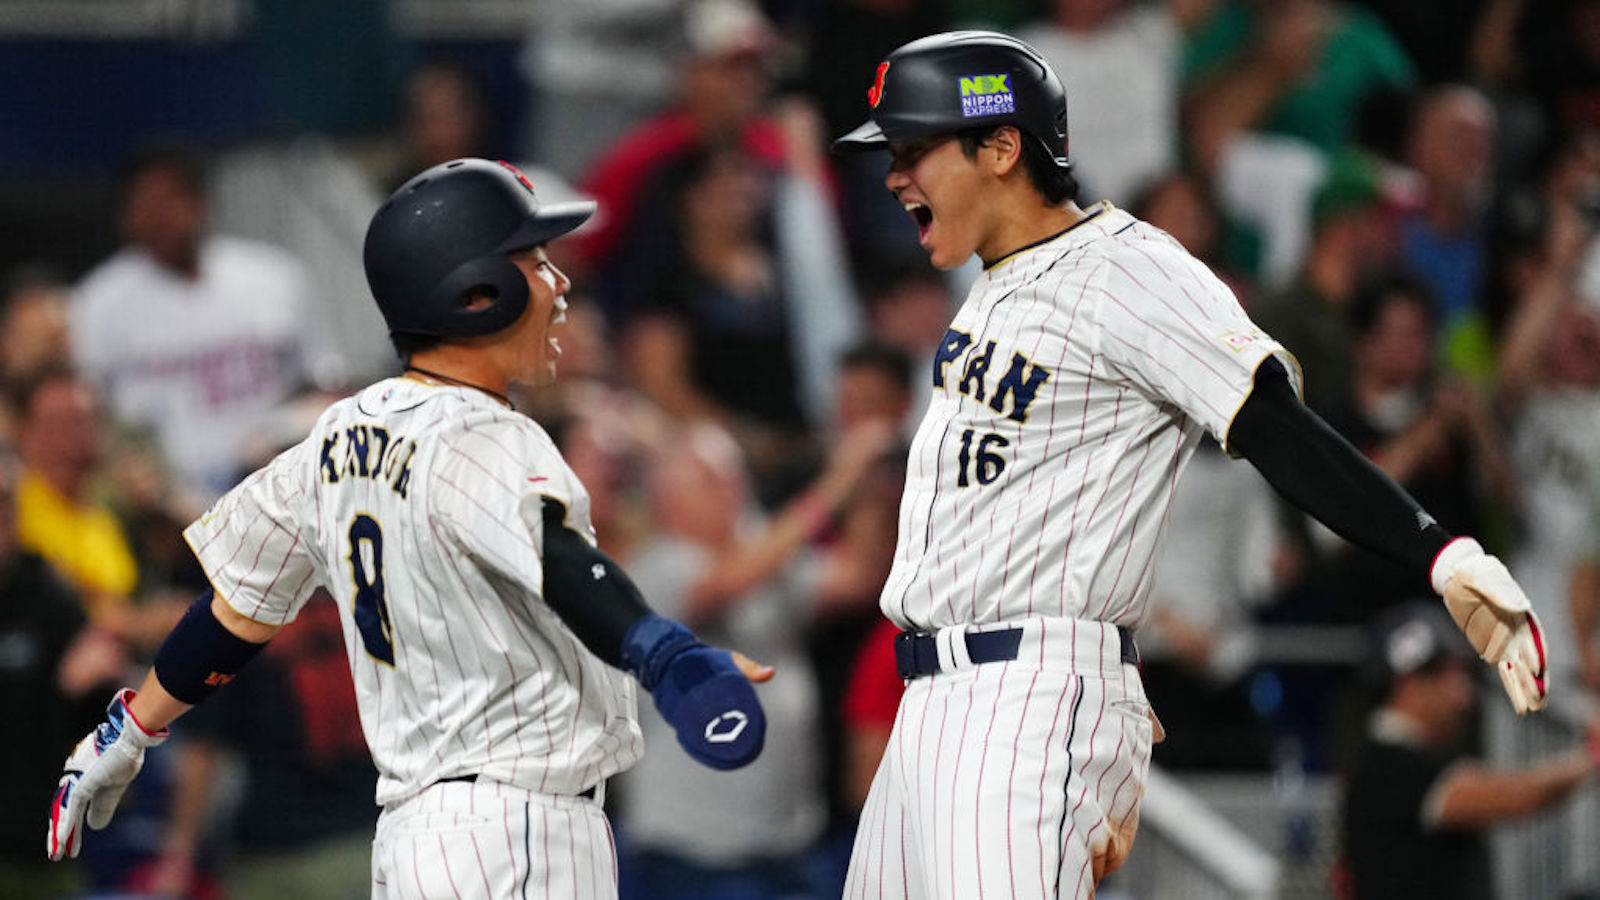 MIAMI, FL - MARCH 20: Kensuke Kondoh #8 and Shohei Ohtani #16 of Team Japan celebrate after scoring on a three-run home run hit by Masataka Yoshida #34 in the seventh inning during the 2023 World Baseball Classic Semifinal game between Team Mexico and Team Japan at loanDepot Park on Monday, March 20, 2023 in Miami, Florida.